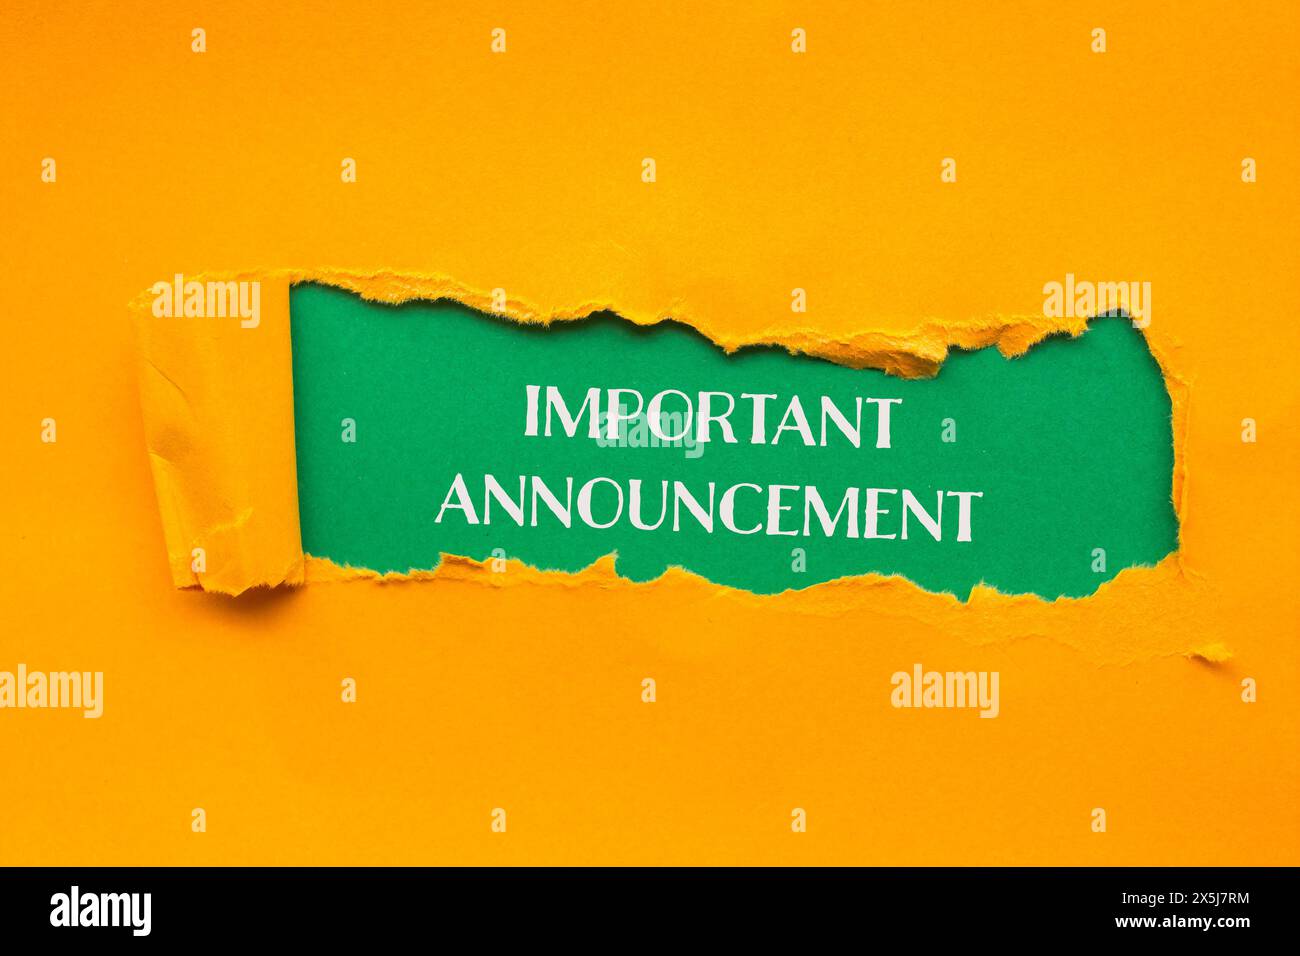 Important announcement words written on torn orange paper with green background. Conceptual important announcement  symbol. Copy space. Stock Photo